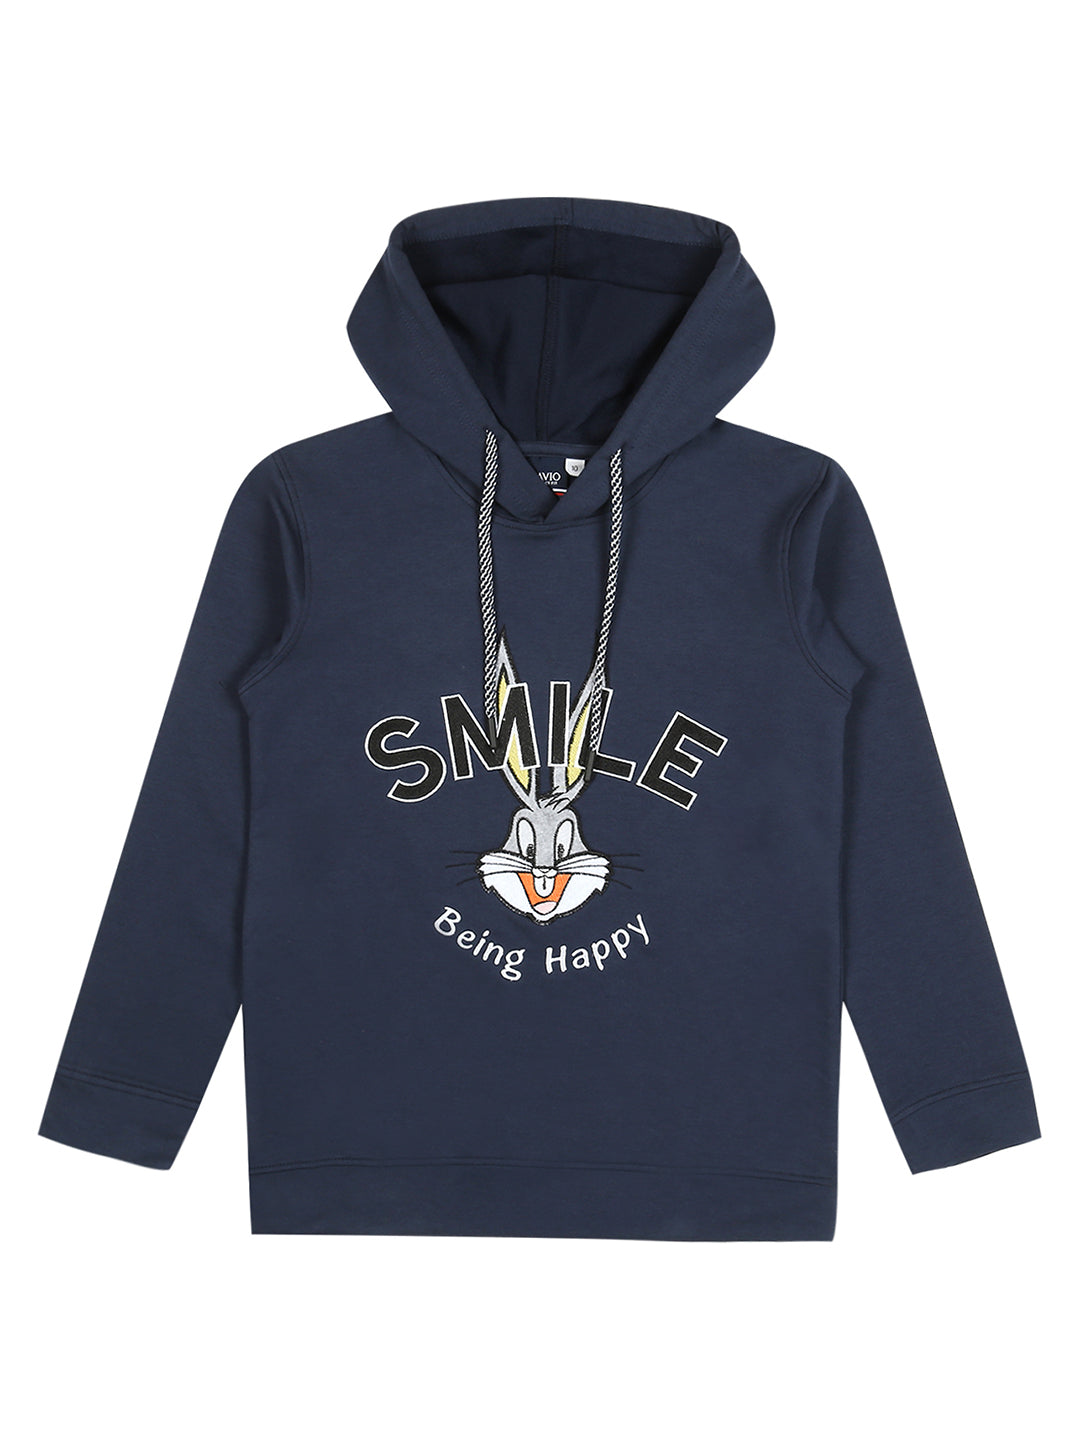 Boys Typography Printed Hooded Cotton Pullover